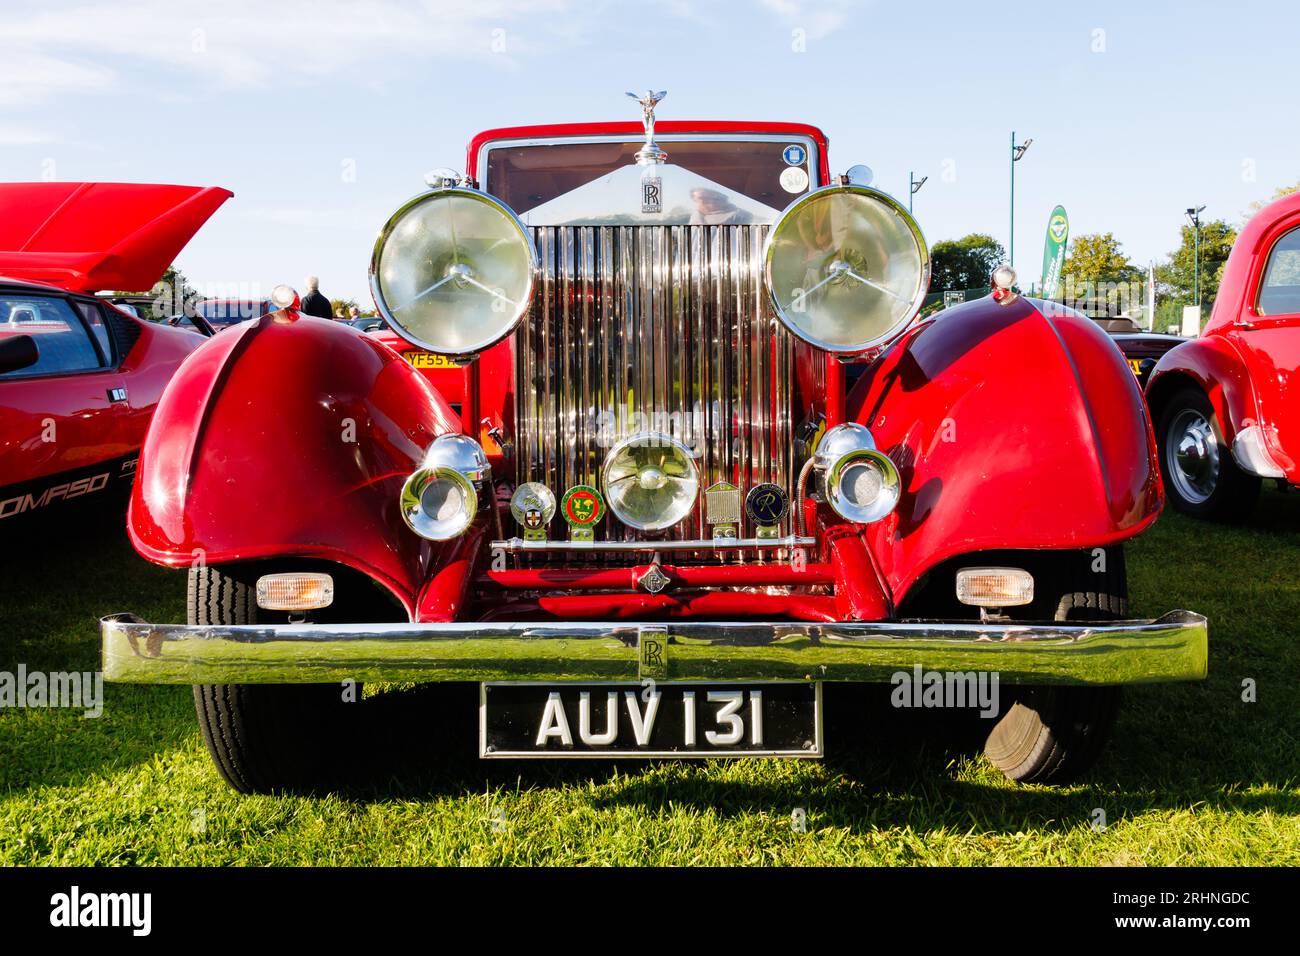 Vintage red 1933 Rolls Royce 20/25 luxury car at a car show. AUV131. Stock Photo